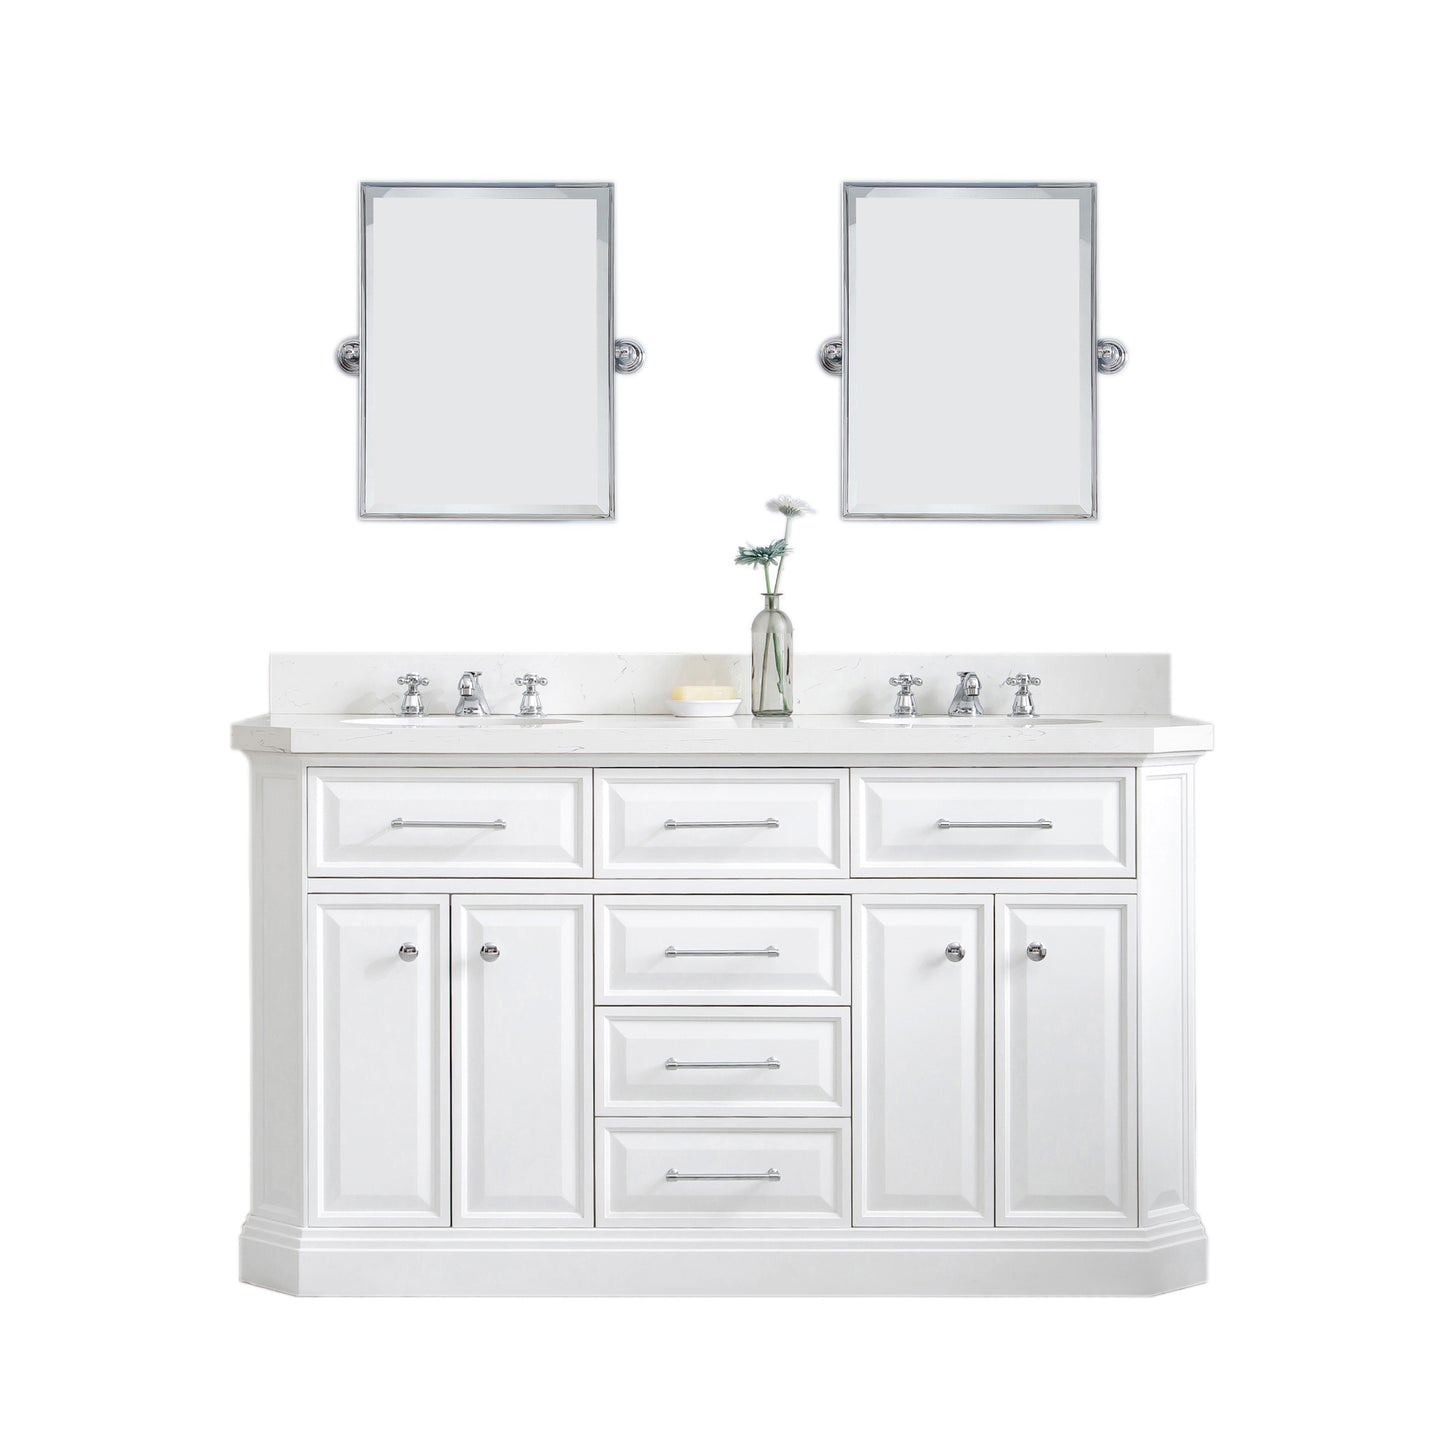 Water Creation Palace 60" Quartz Carrara Bathroom Vanity Set with Hardware and Faucets and Mirror in Chrome Finish - Luxe Bathroom Vanities